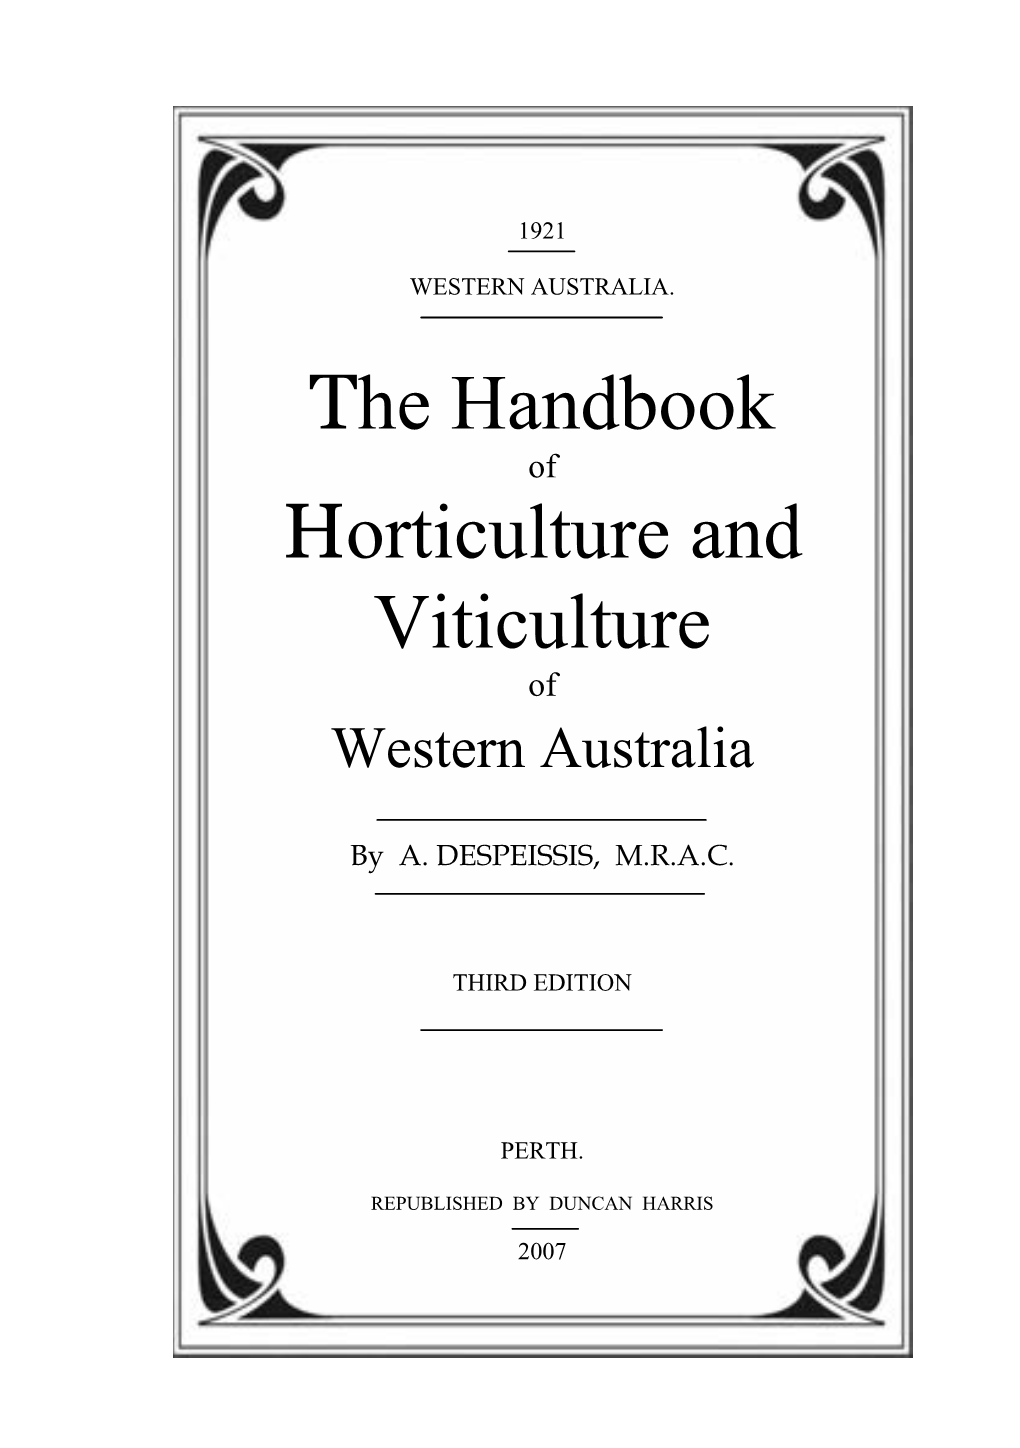 The Handbook Horticulture and Viticulture